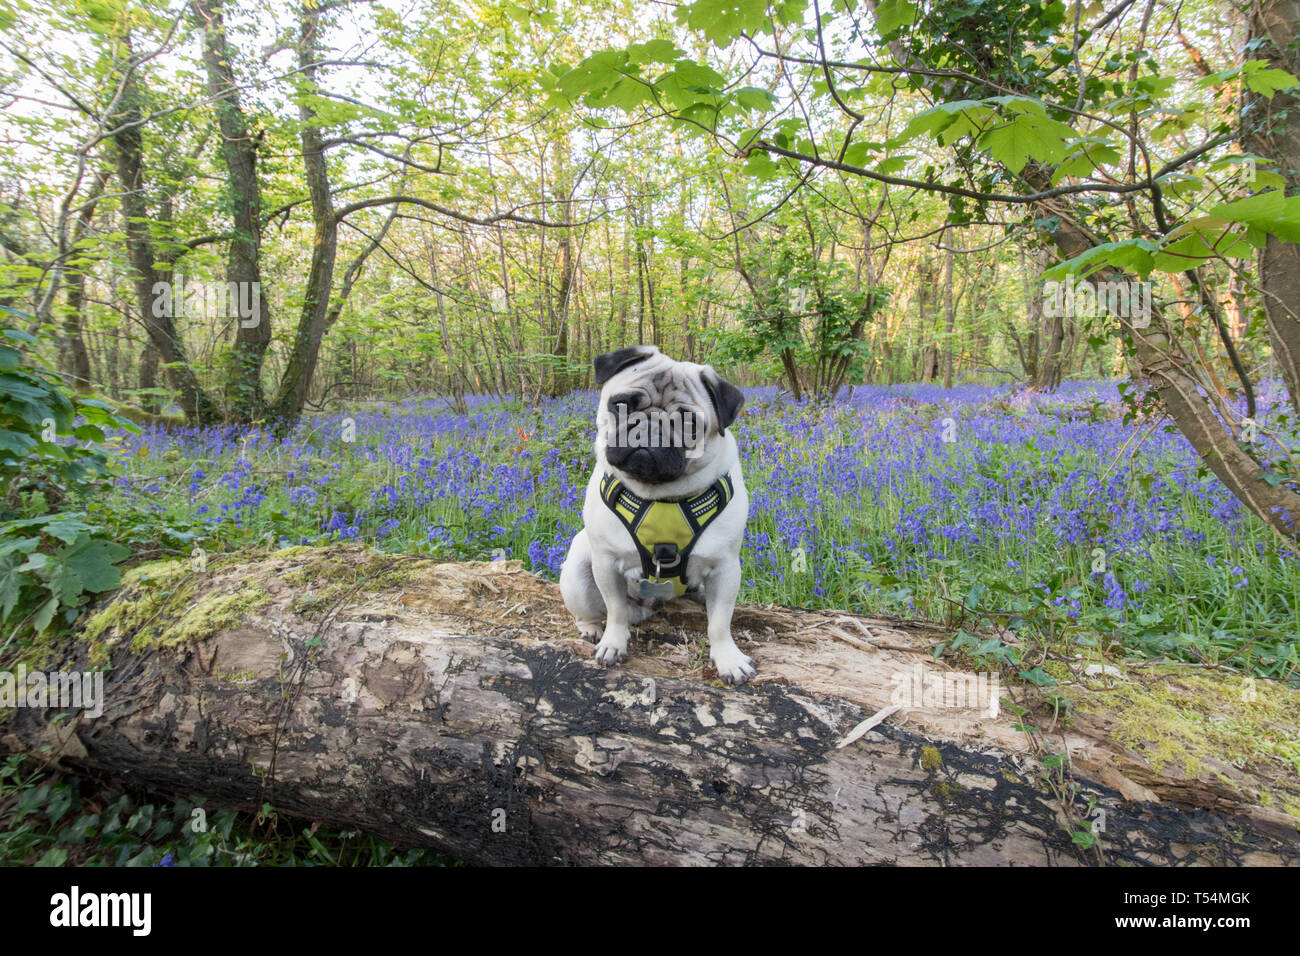 Pug dog sitting on logs in bluebell woods looking towards camera Stock Photo